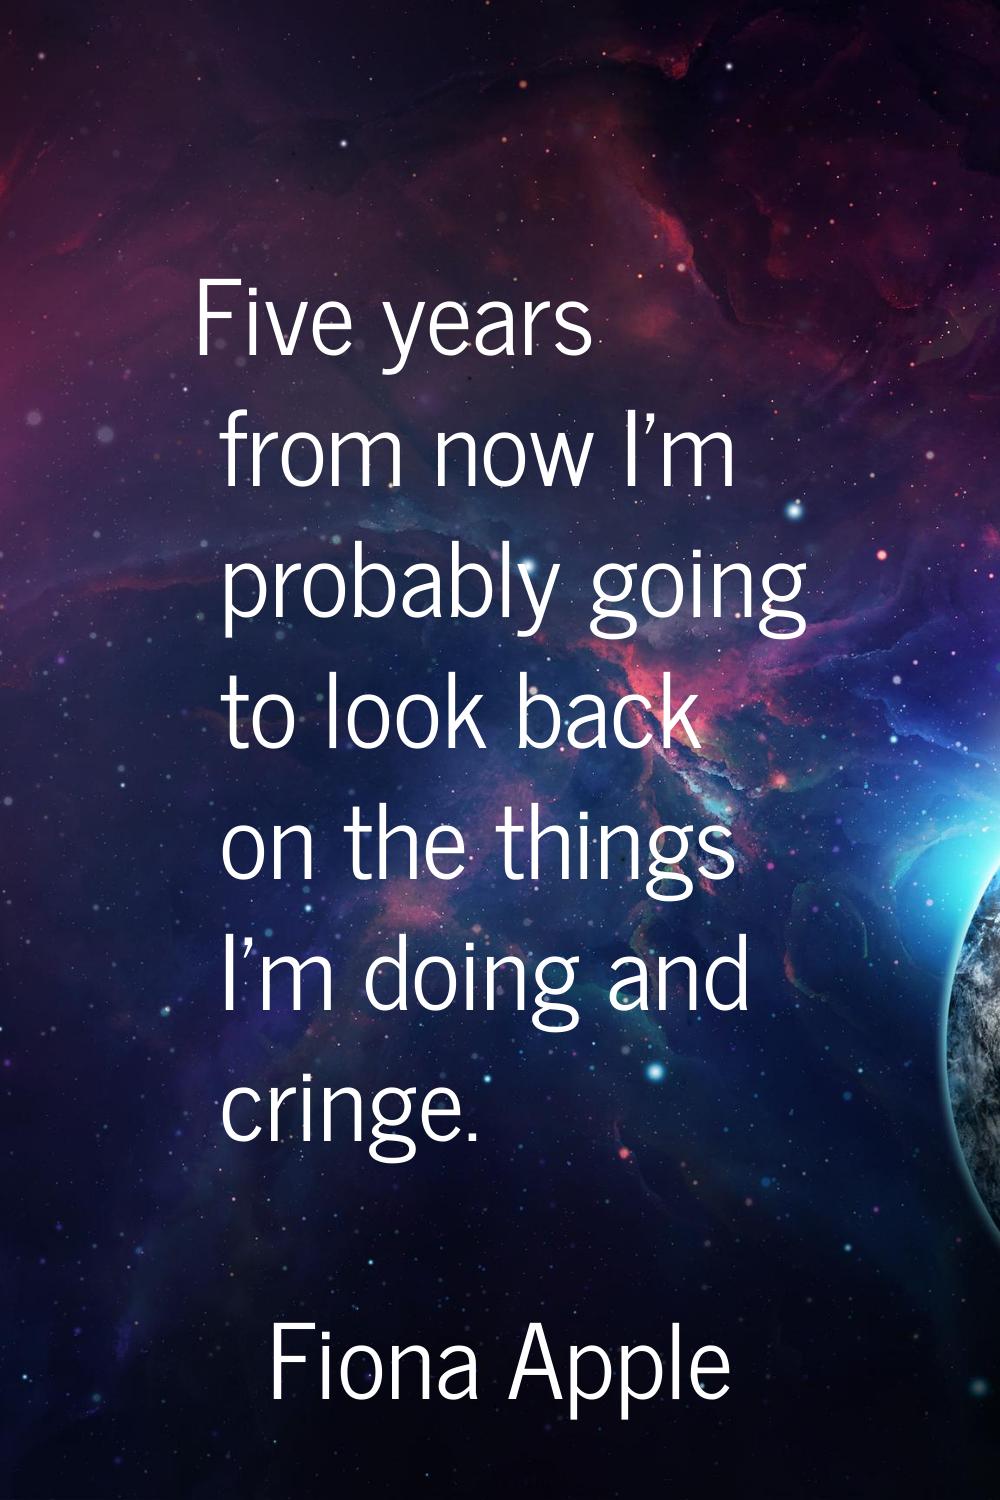 Five years from now I'm probably going to look back on the things I'm doing and cringe.